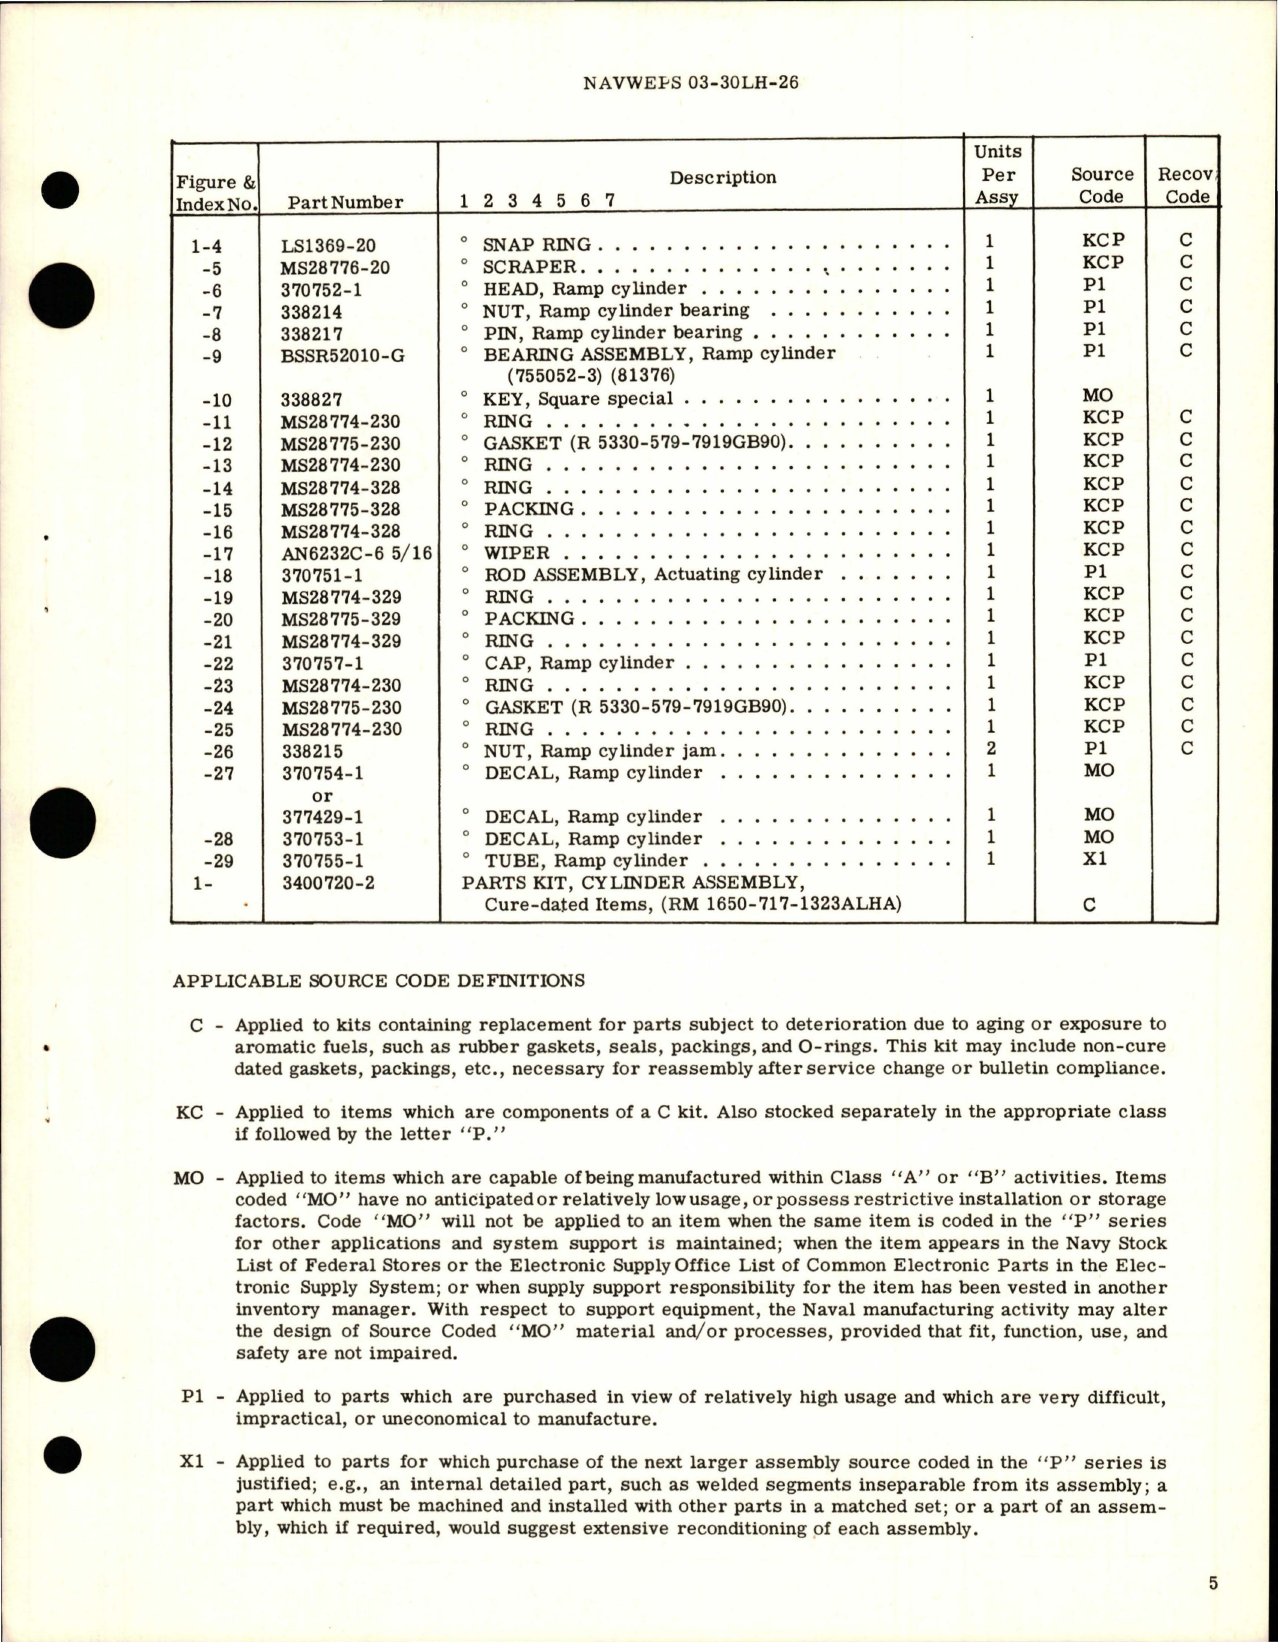 Sample page 5 from AirCorps Library document: Overhaul Instructions with Parts Breakdown for Ramp Actuating Cylinder Assembly - Part 370750-1